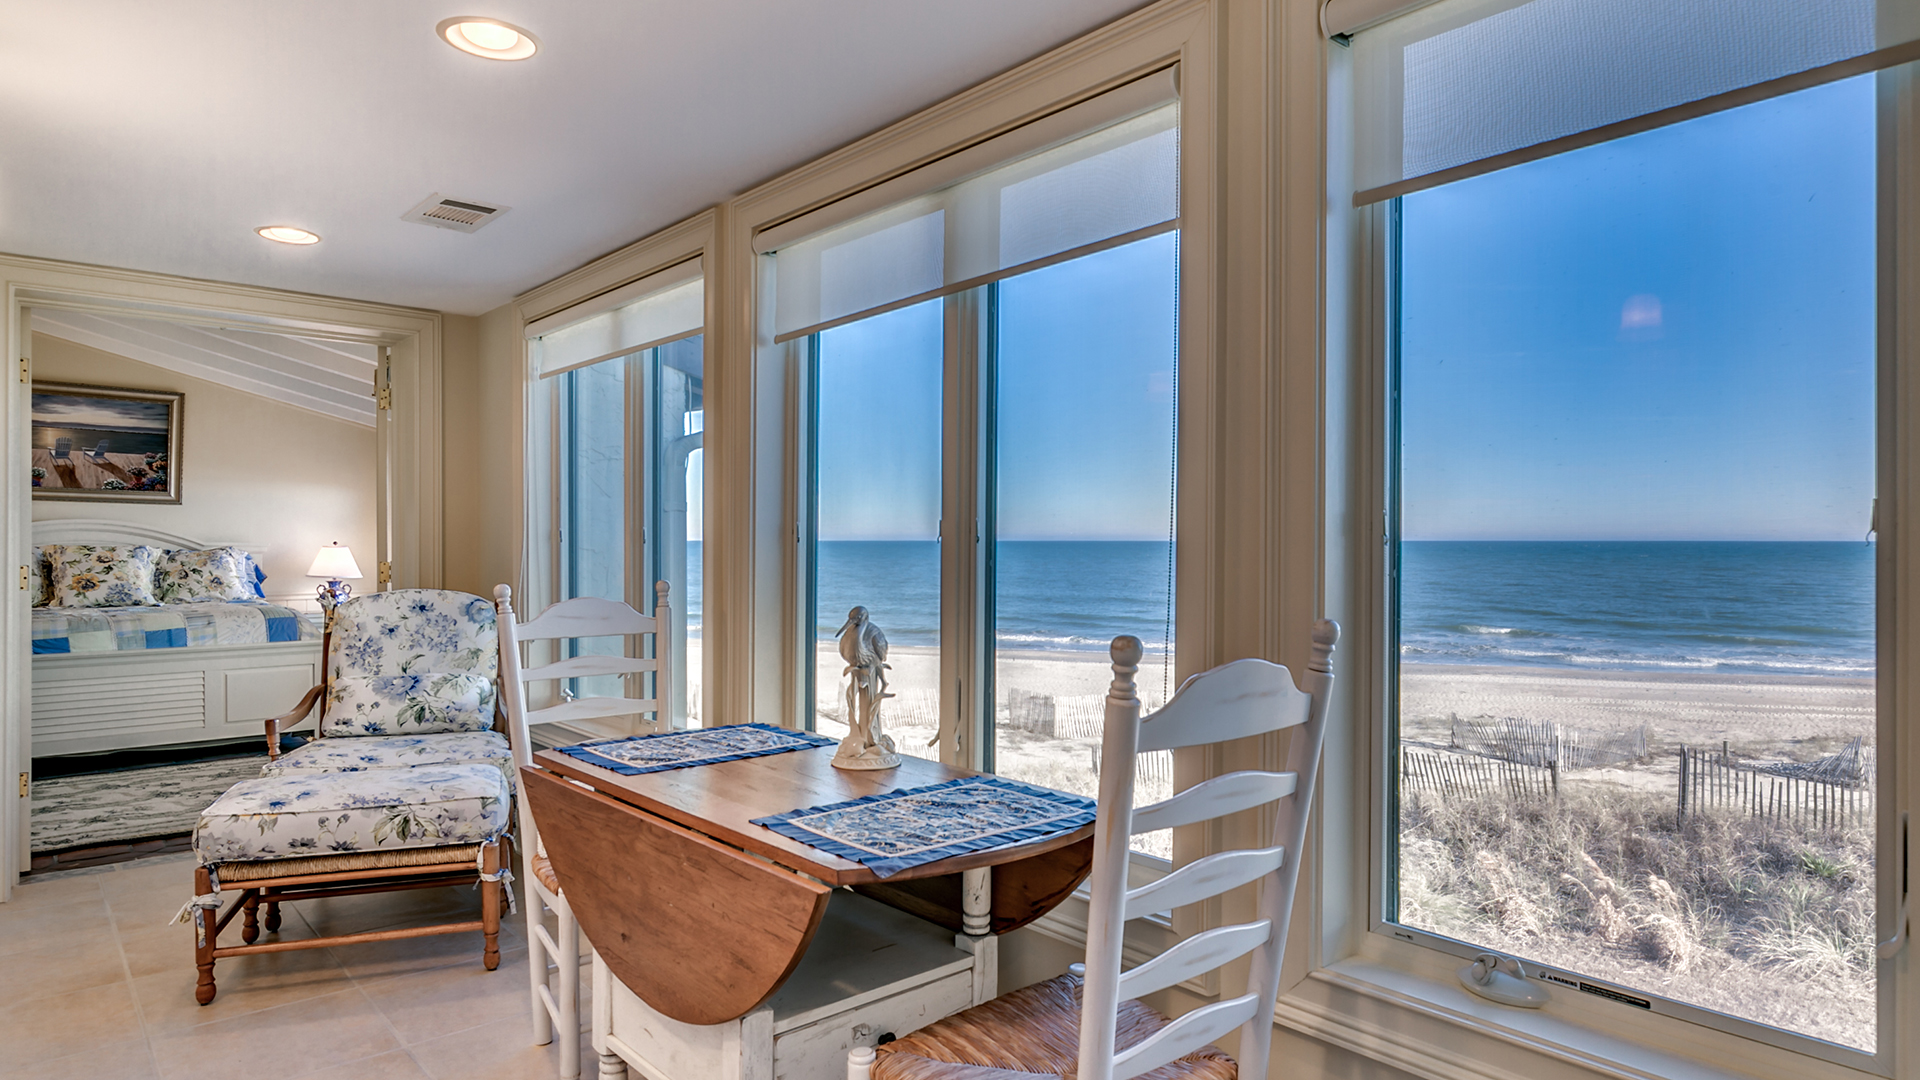 Sea Breeze - Great oceanfront views and close to the Beach Club